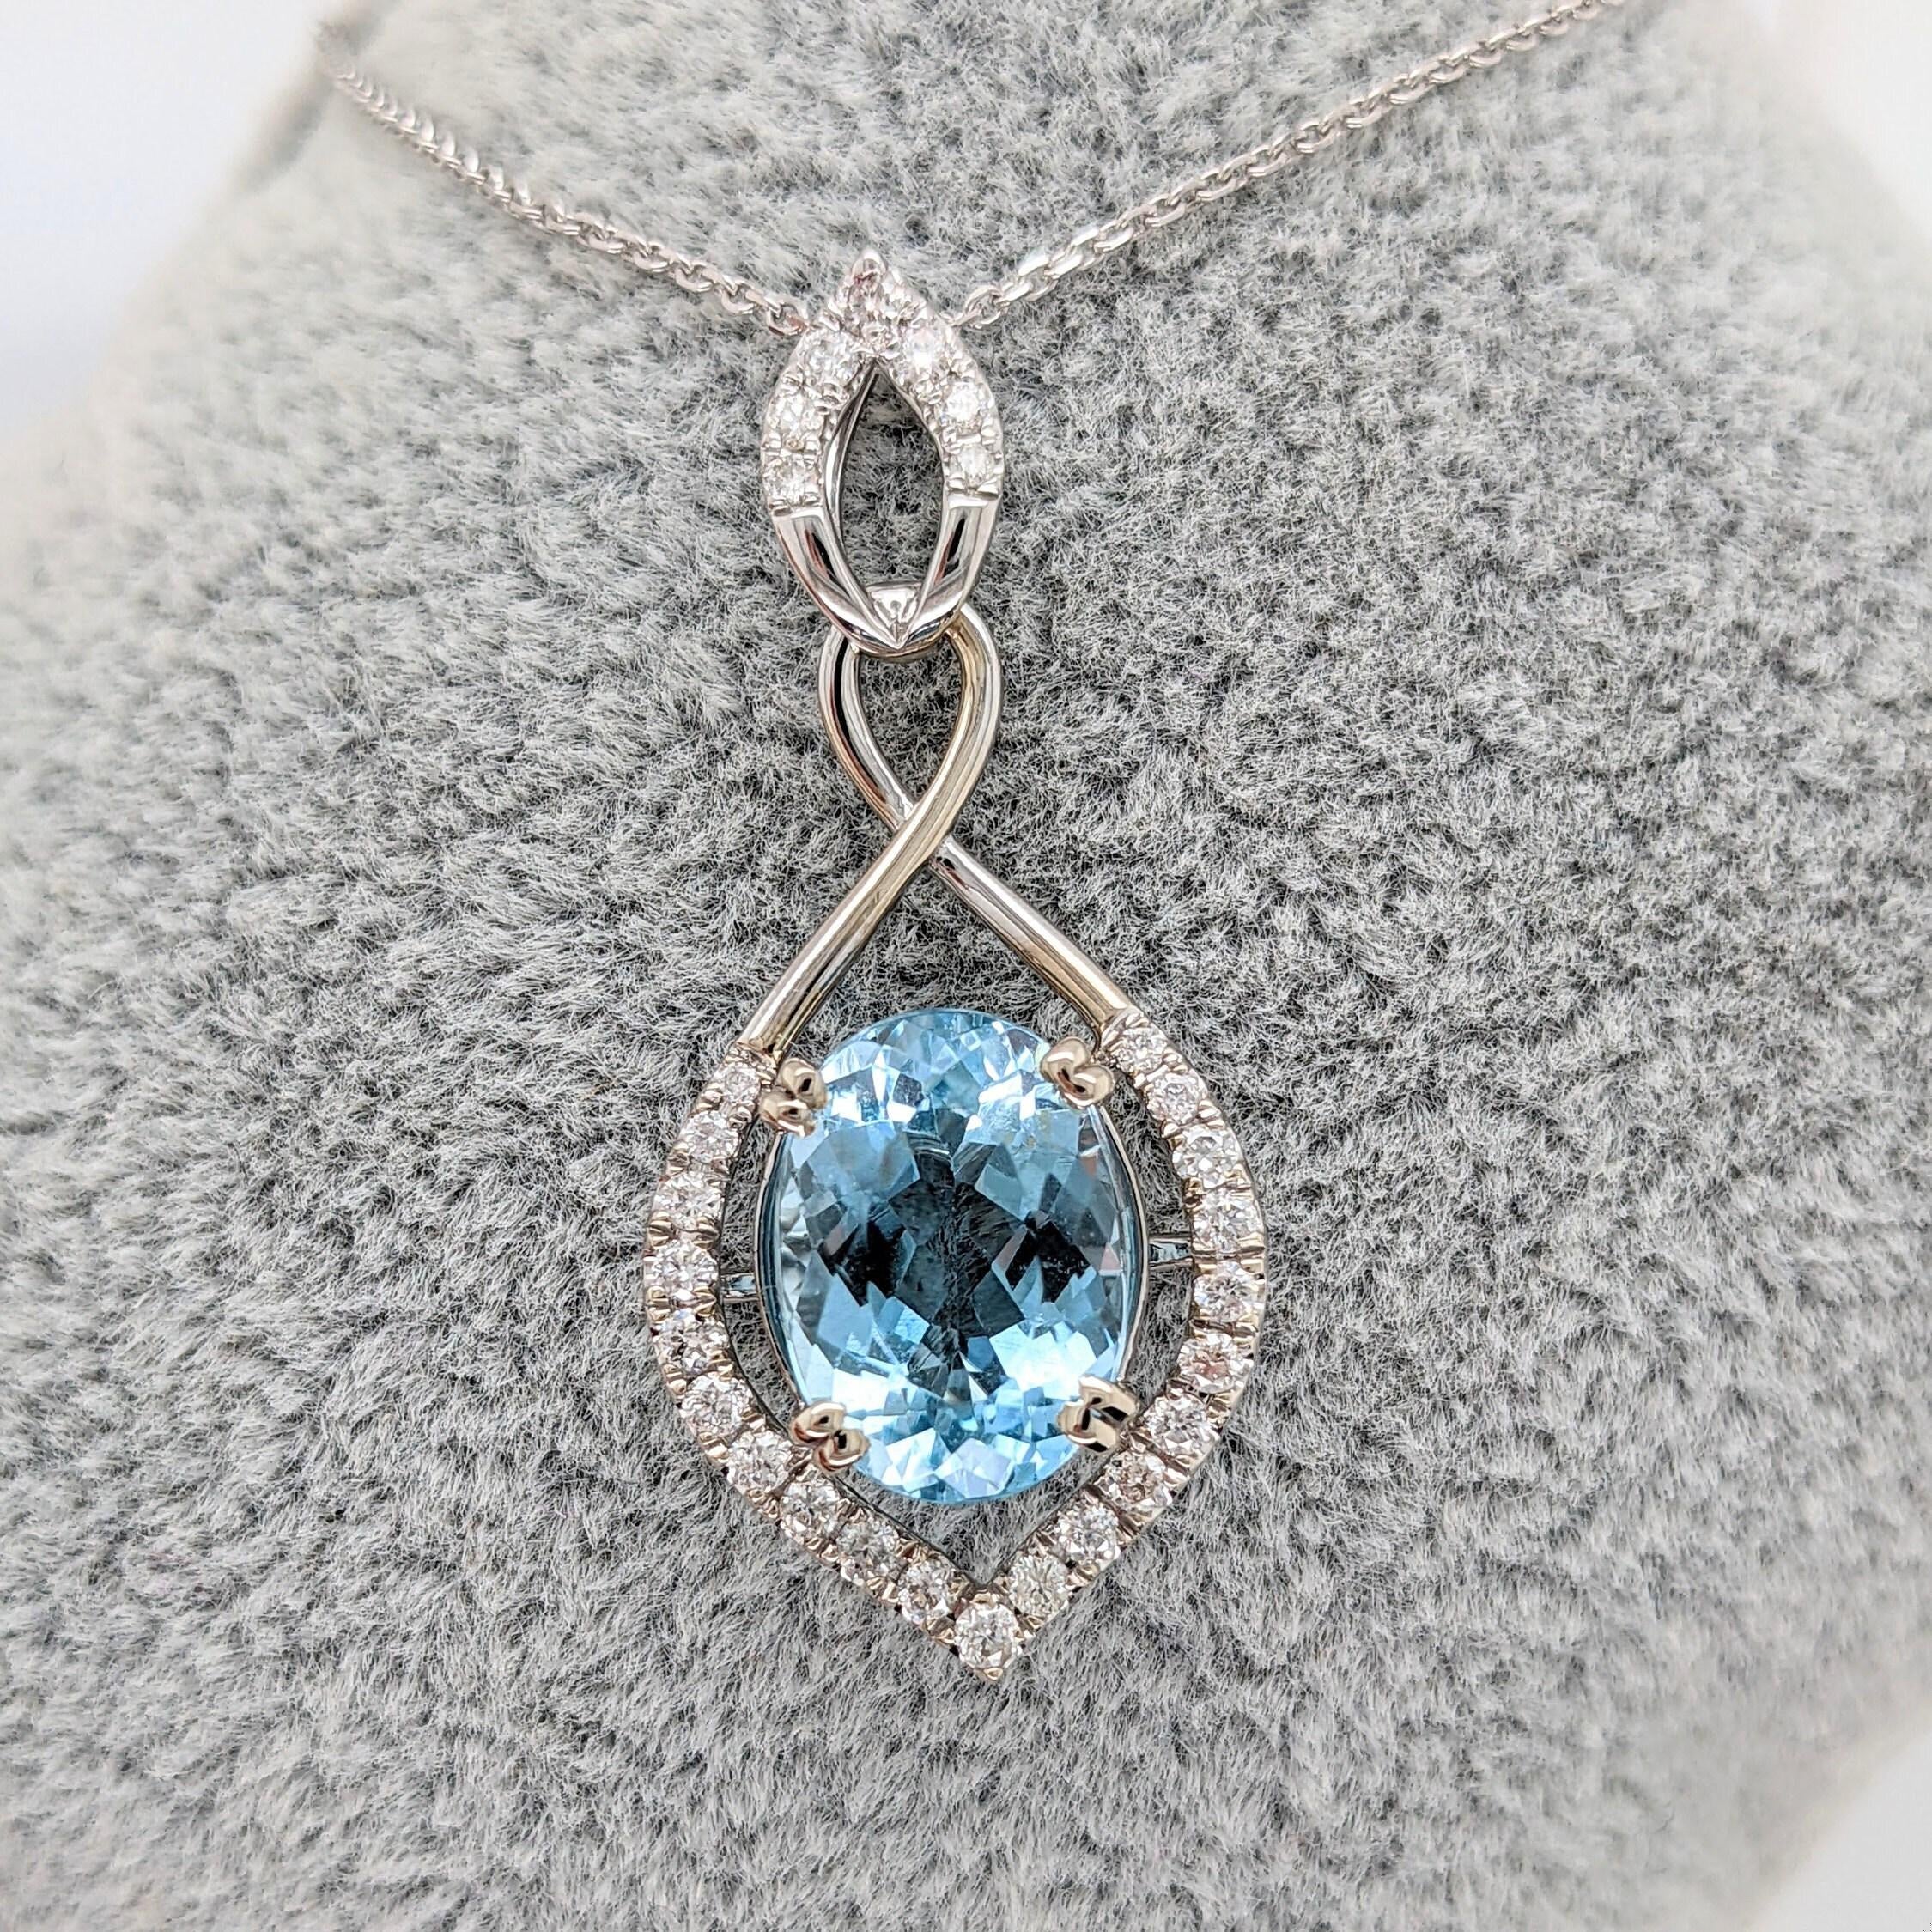 3ct Aquamarine Pendant w Natural Diamonds in Solid 14K White Gold Oval 11x9mm